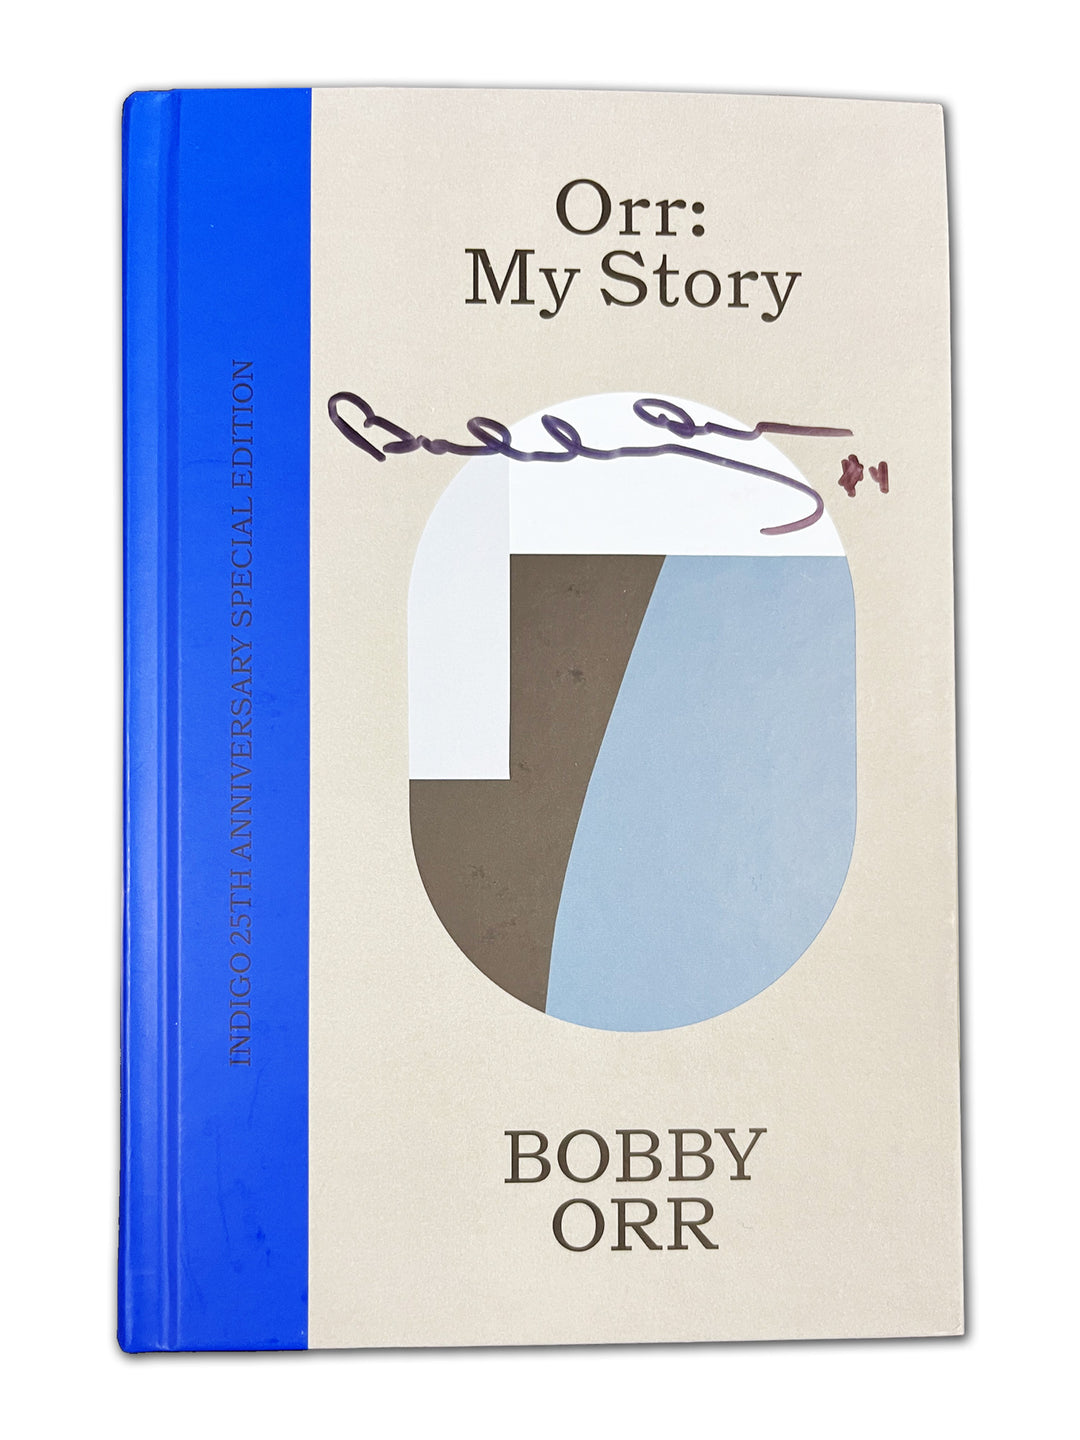 Bobby Orr "My Story" Book - Autographed Indigo Limited Edition, Boston Bruins, NHL, Hockey, Autographed, Signed, AACMH33208